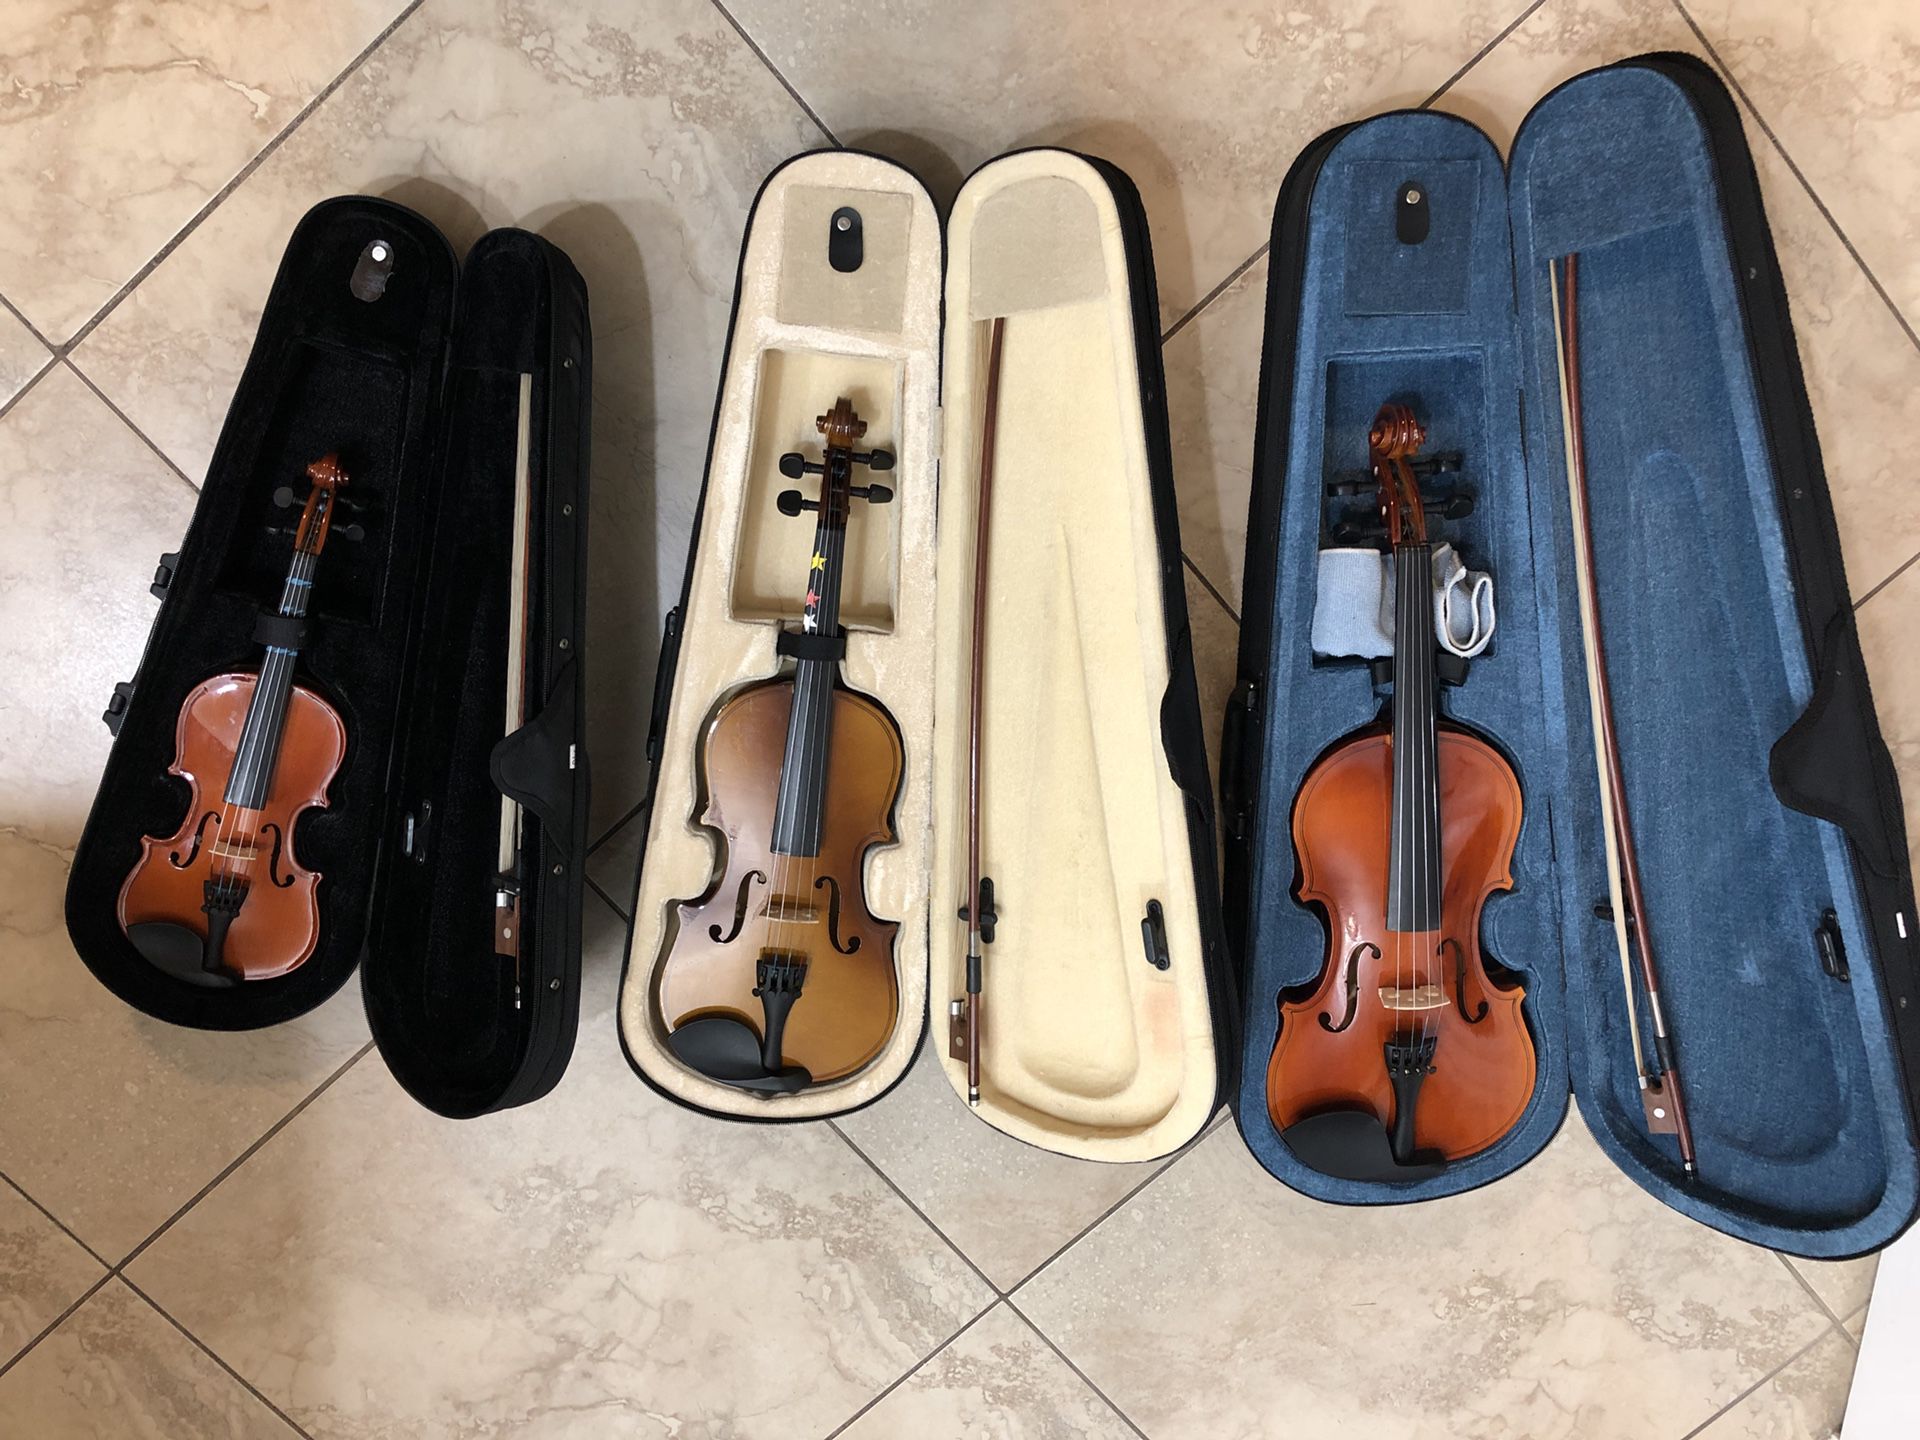 1/2 & 1/16 Violins with cases